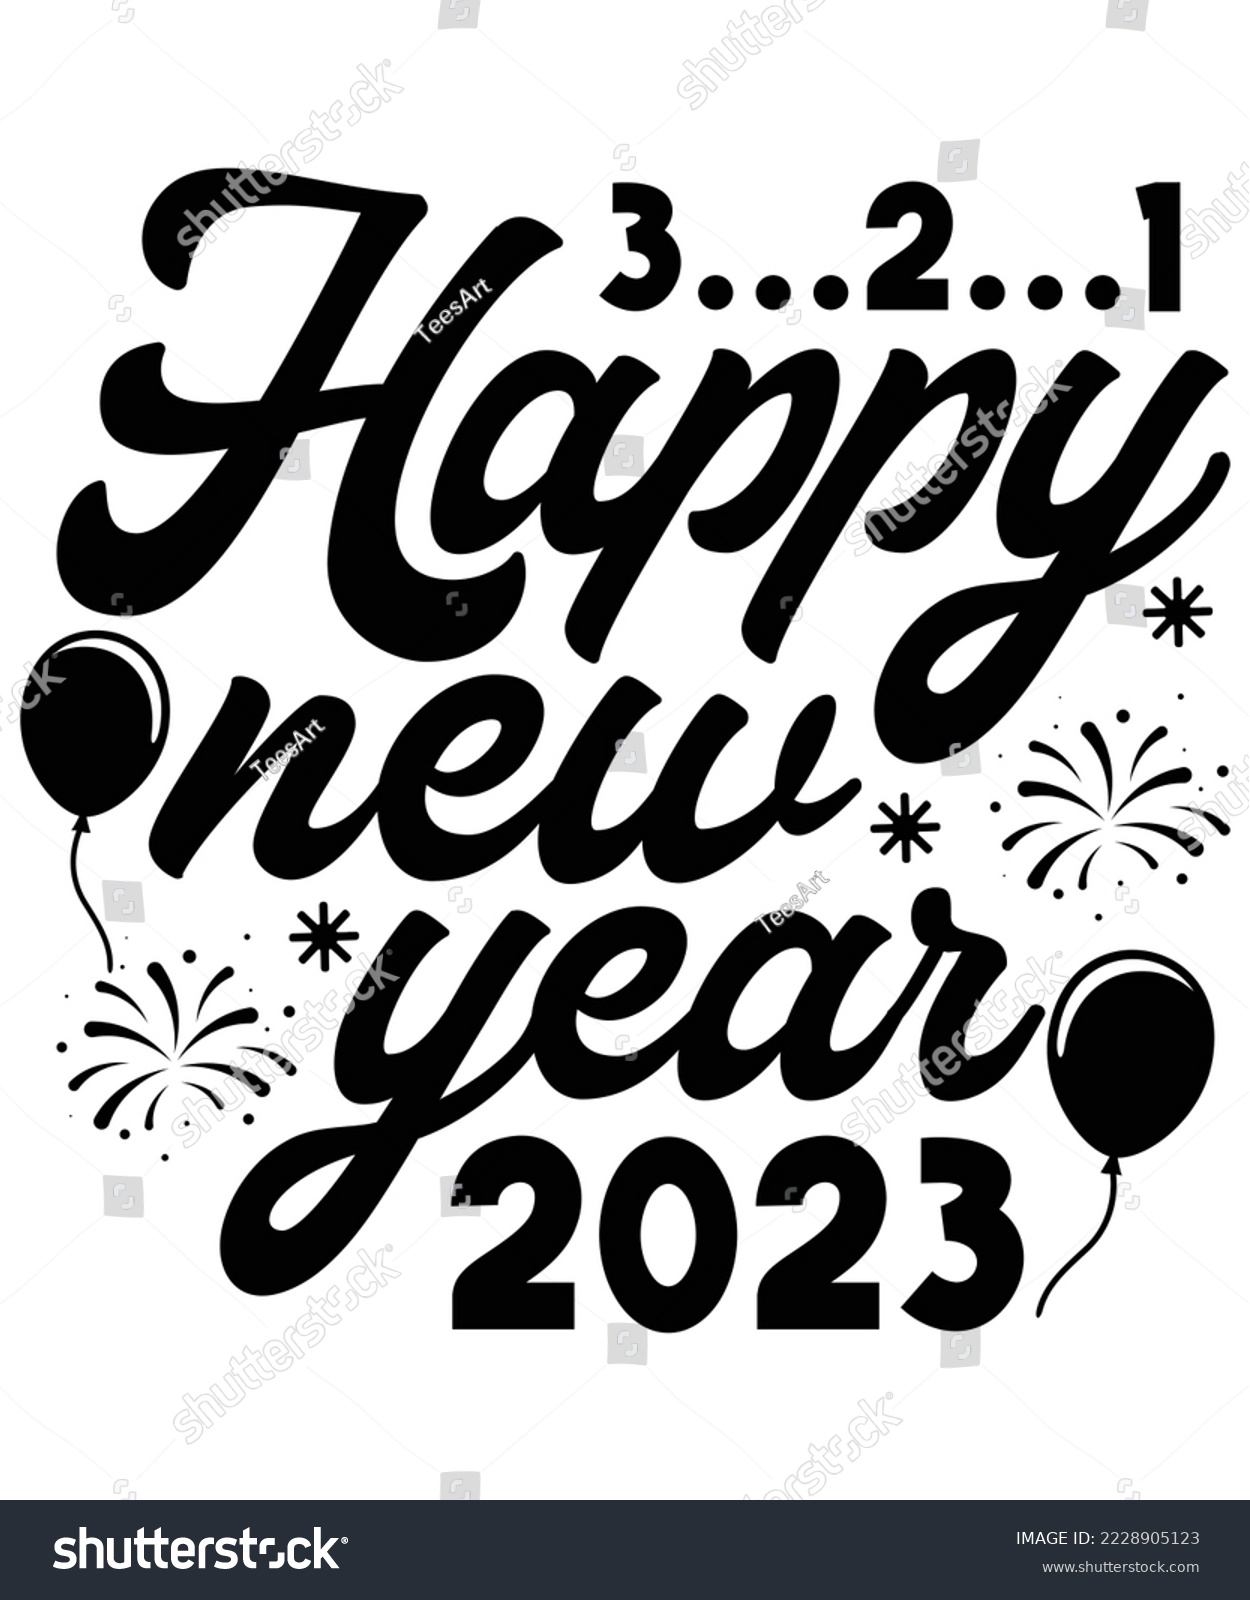 SVG of New year 2023 svg design t shirt vector, happy new year 2023, new year svg designs,  svg